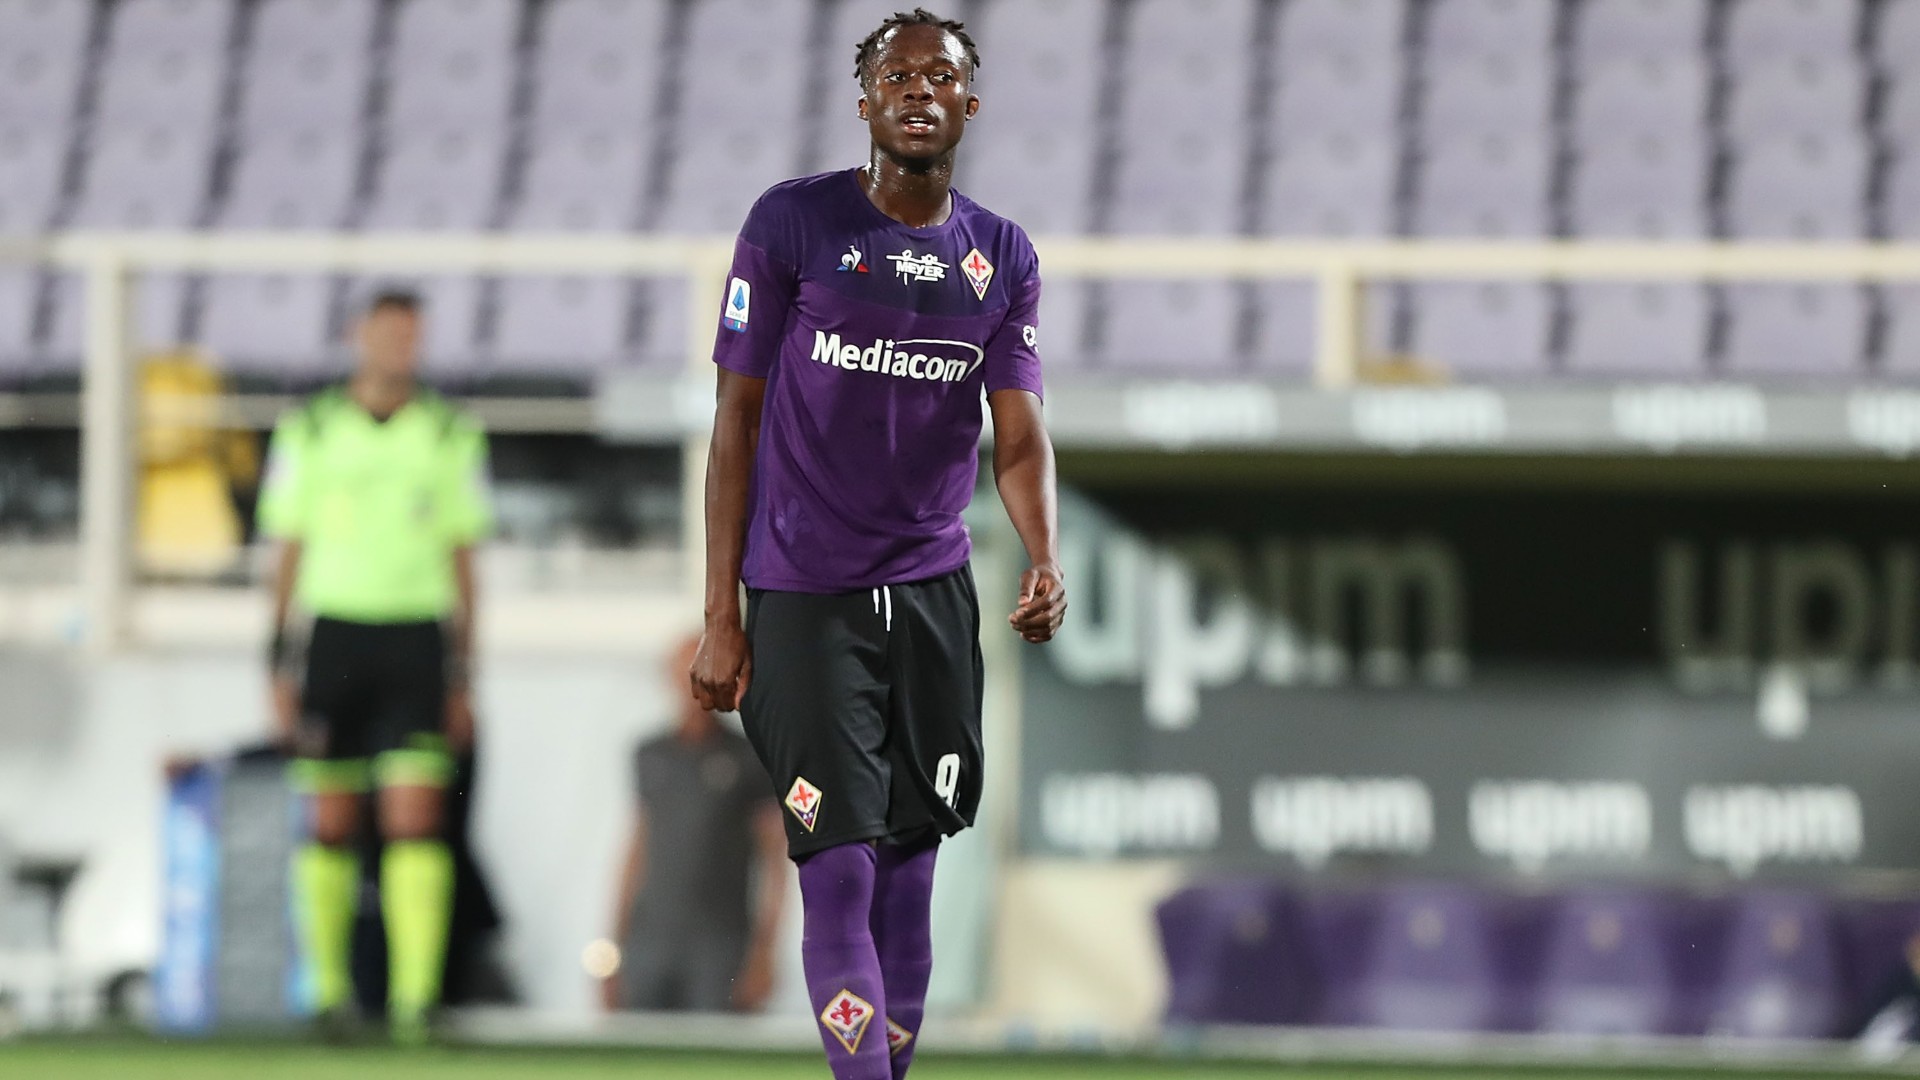 Christian Kouame wished to have scored in long-awaited Fiorentina debut